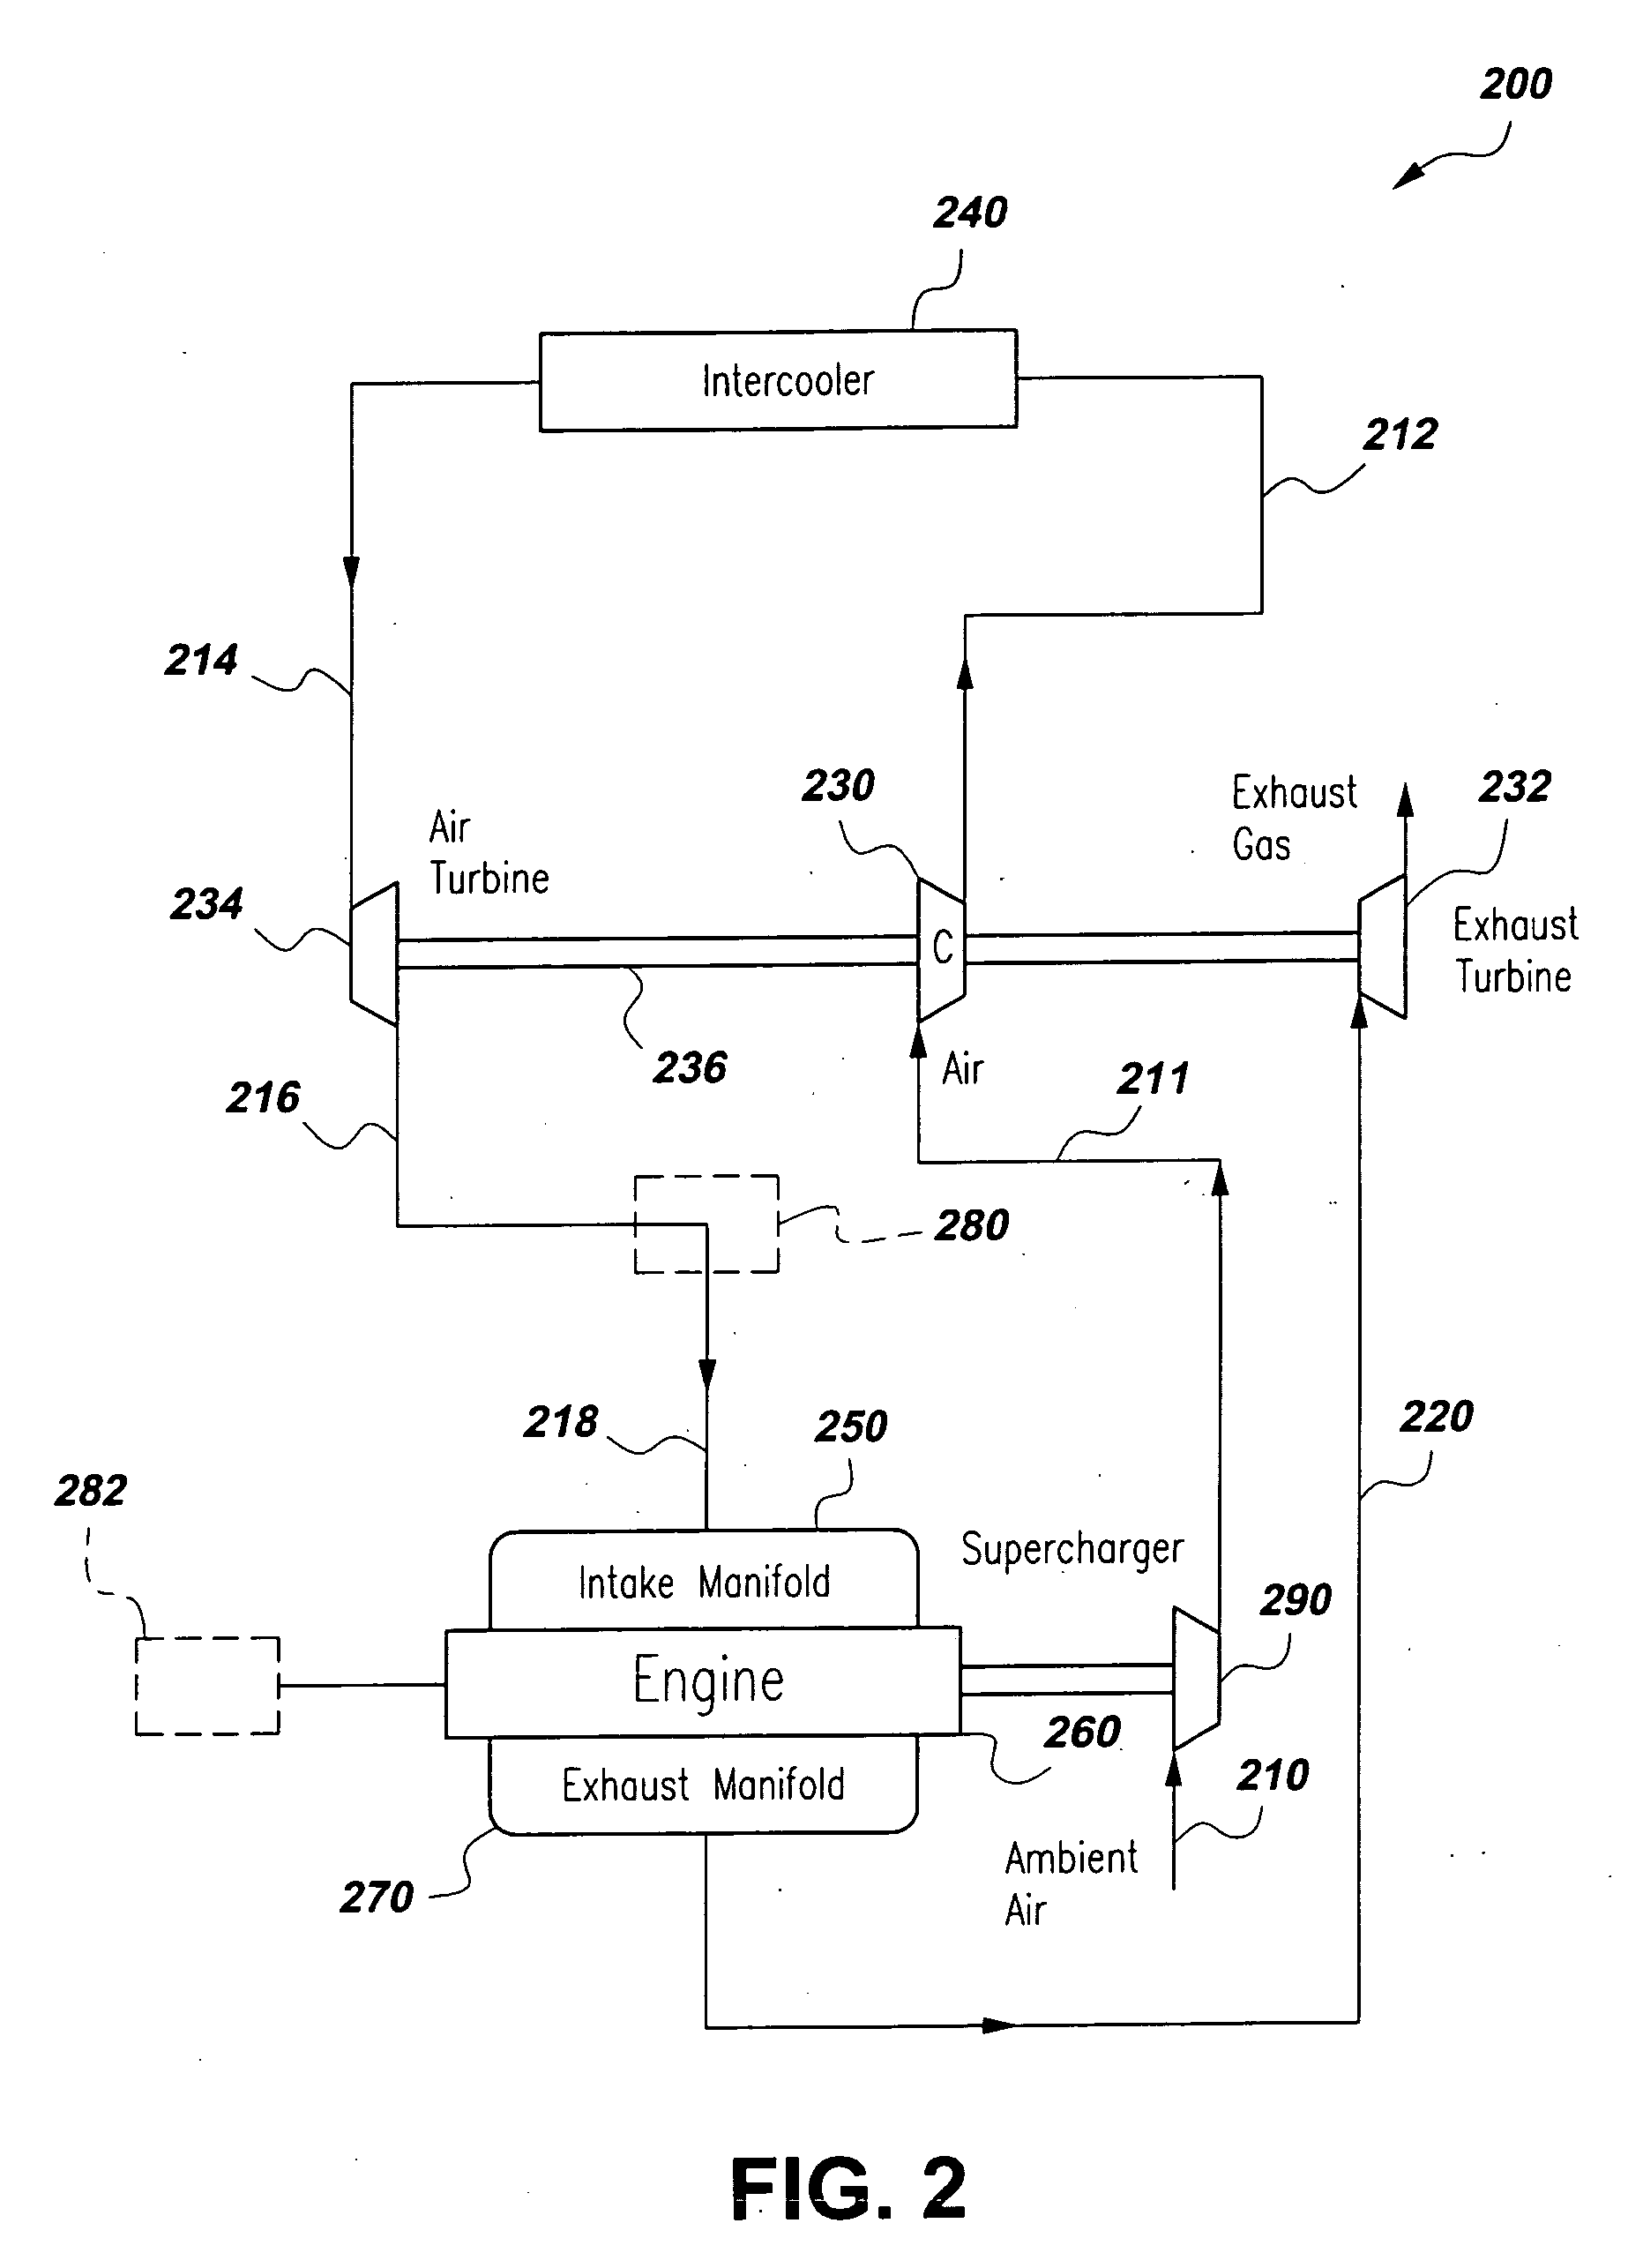 Turbocharged intercooled engine utilizing the turbo-cool principle and method for operating the same